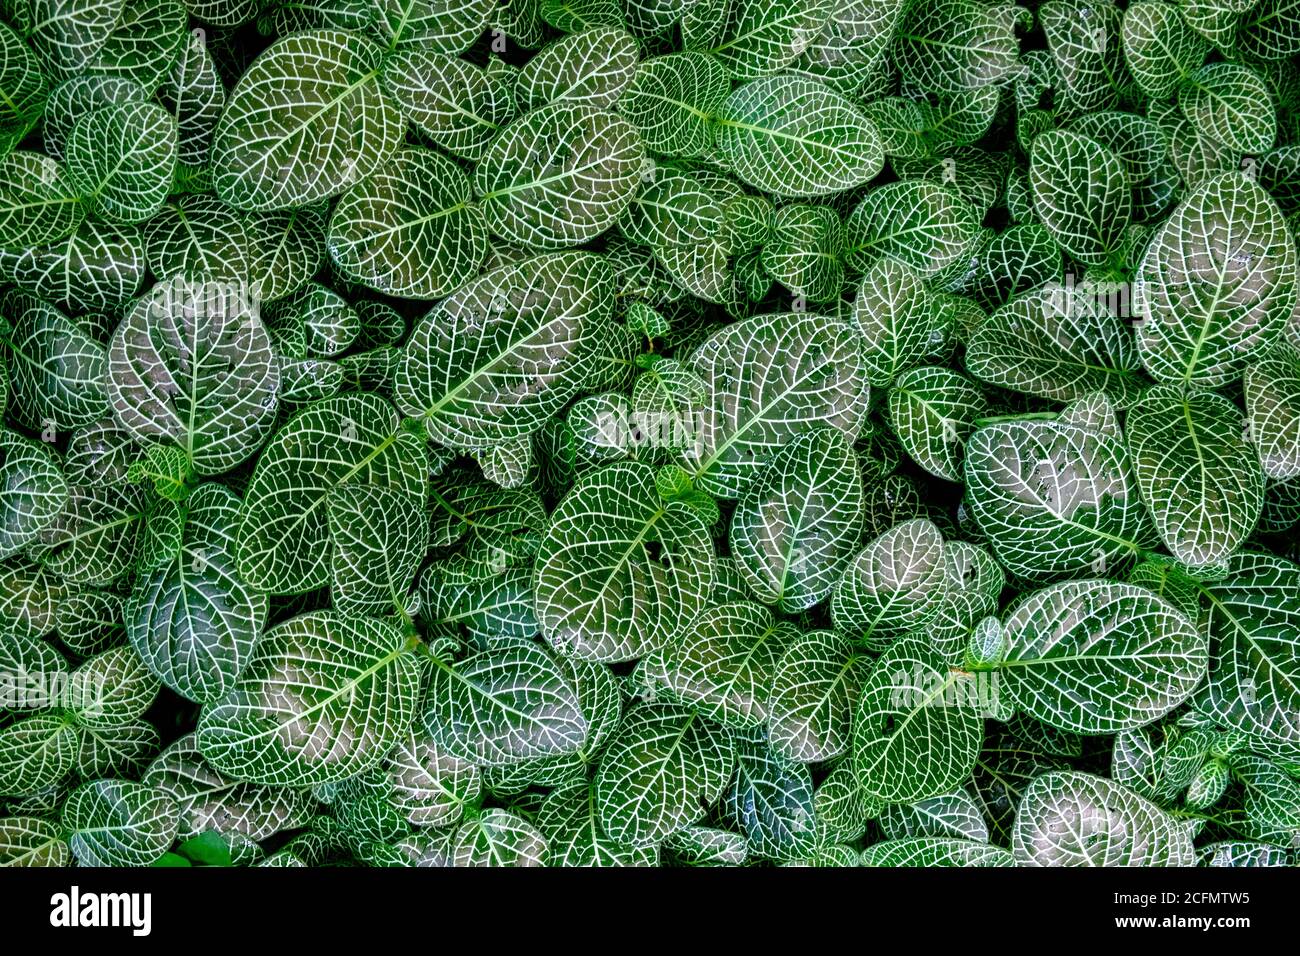 A plant with variegated leaves, Kew Gardens, London, UK Stock Photo